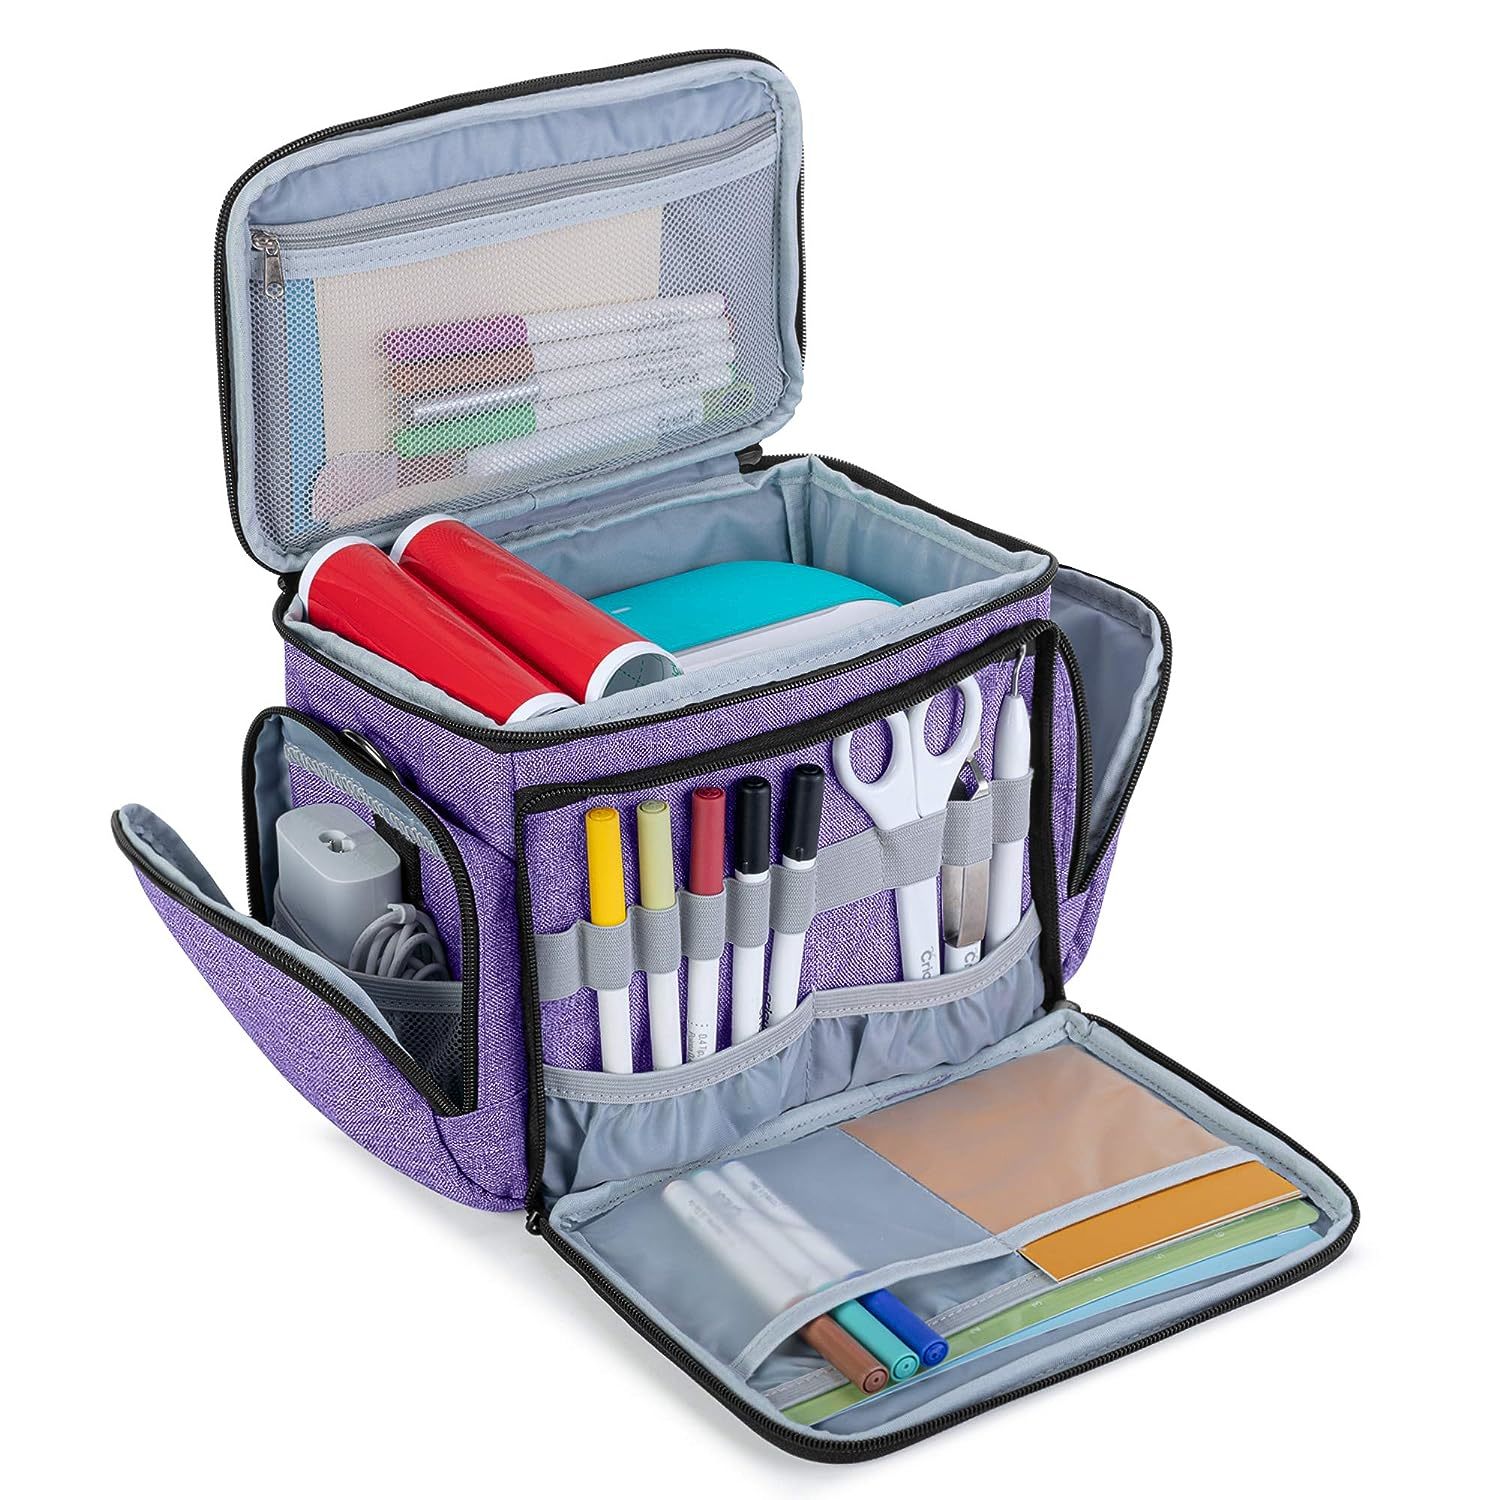 Does anyone have this carrying case or recommend one for a cricut